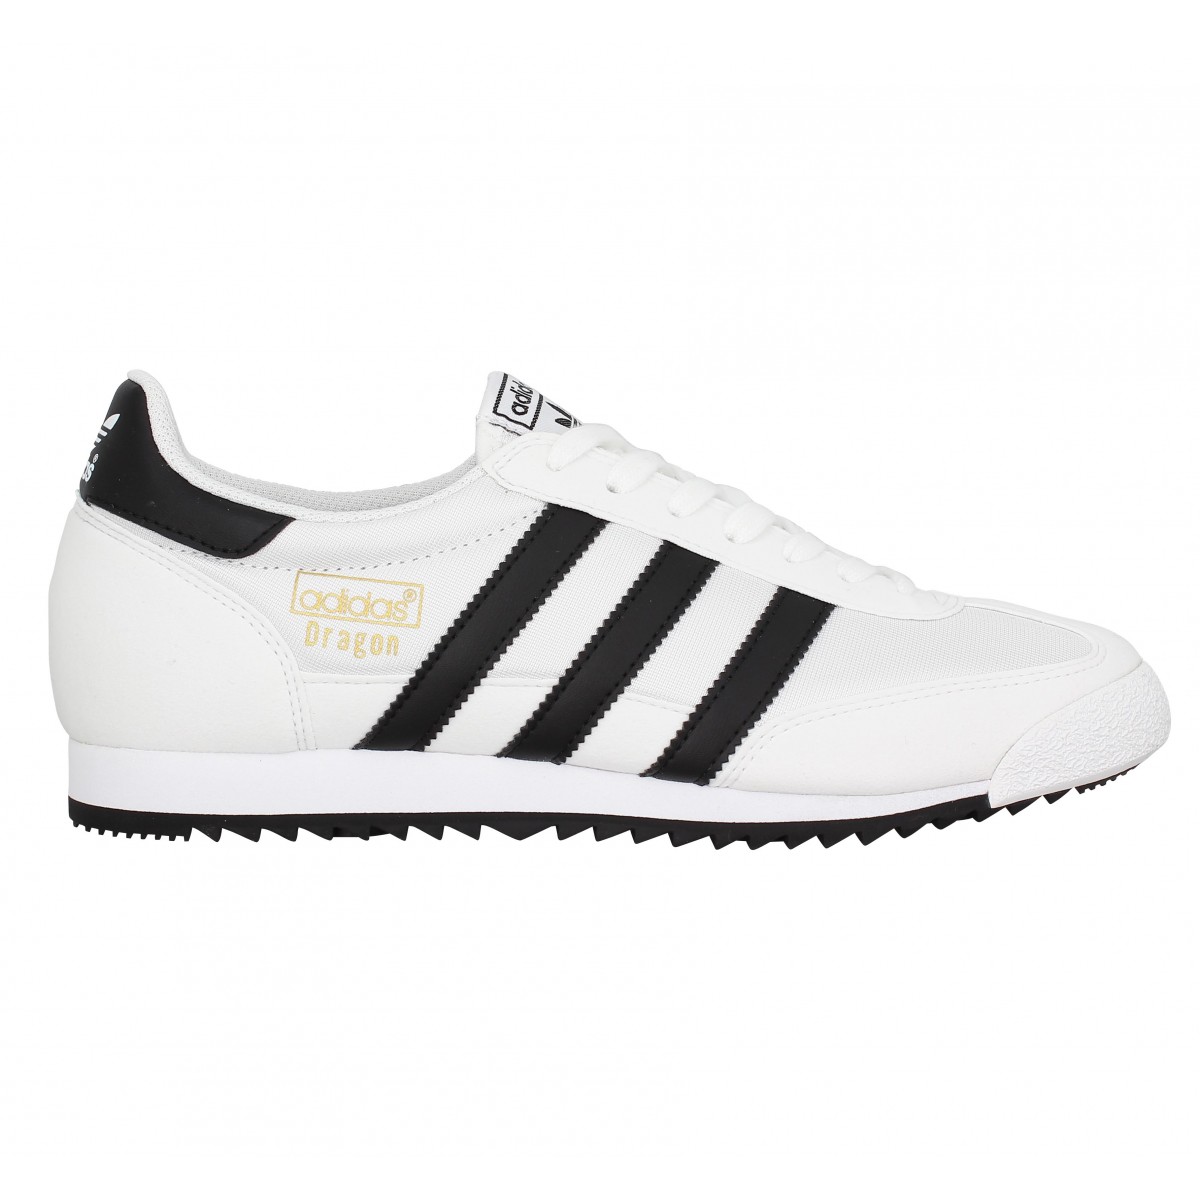 adidas dragon chaussures loisirs homme